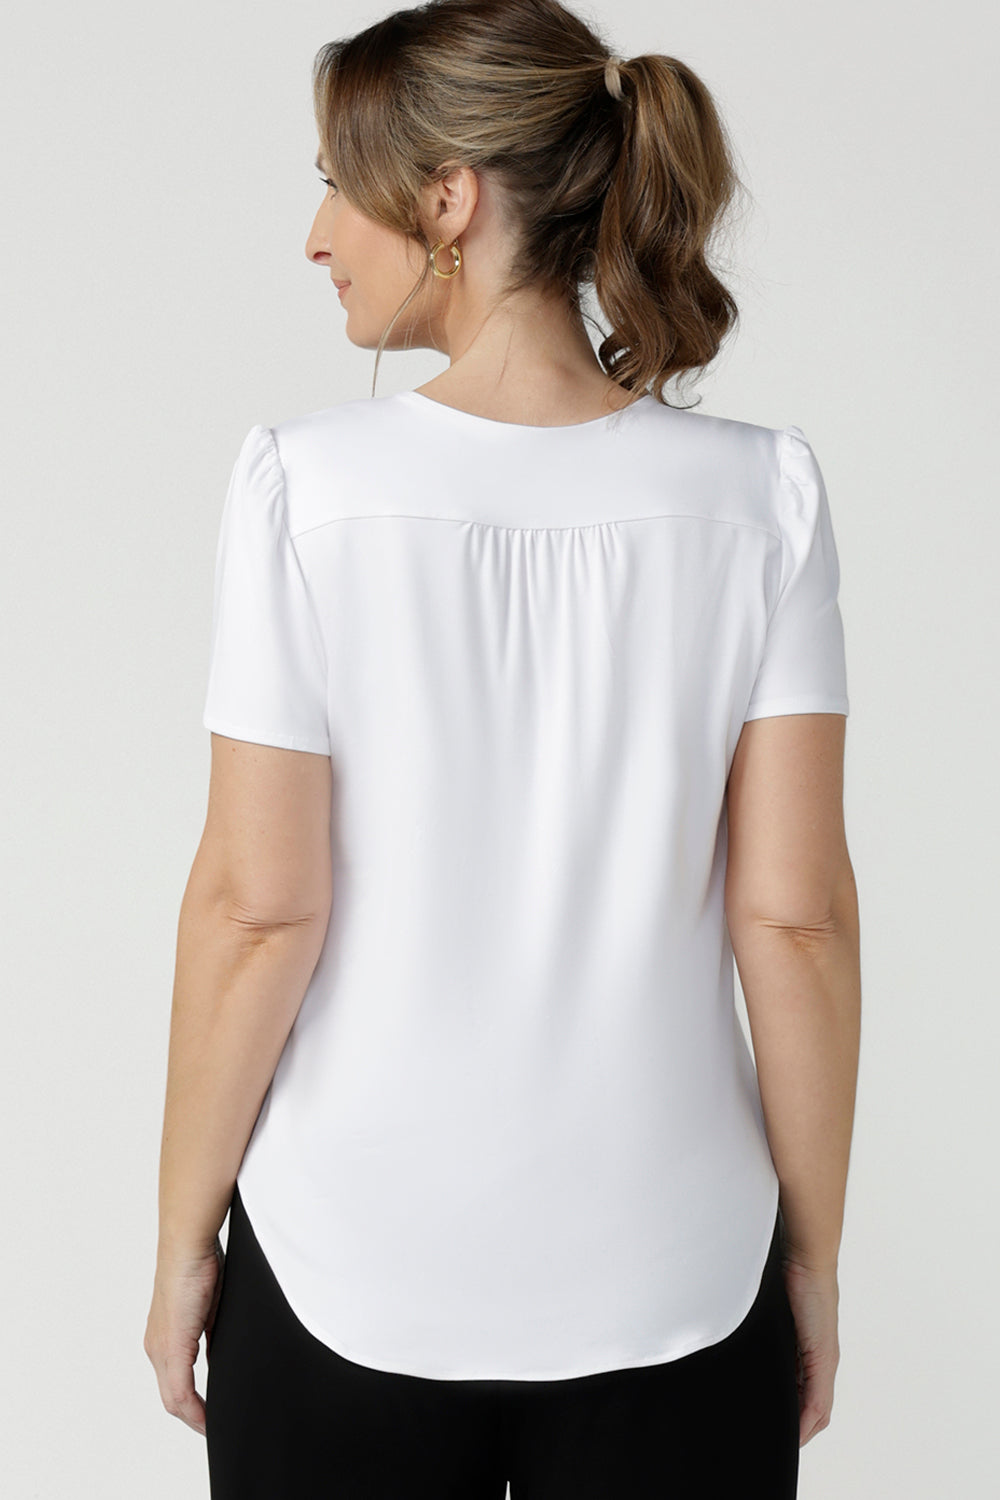 Back view of size 10, 40 plus woman wears a V-neck, short sleeve top in white bamboo jersey. This tailored white top cuts a T-shirt look for casual wear and comfortable workwear. Shop made-in-Australia bamboo jersey tops online in petite, mid size and plus sizes at women's clothing brand, Leina & Fleur.